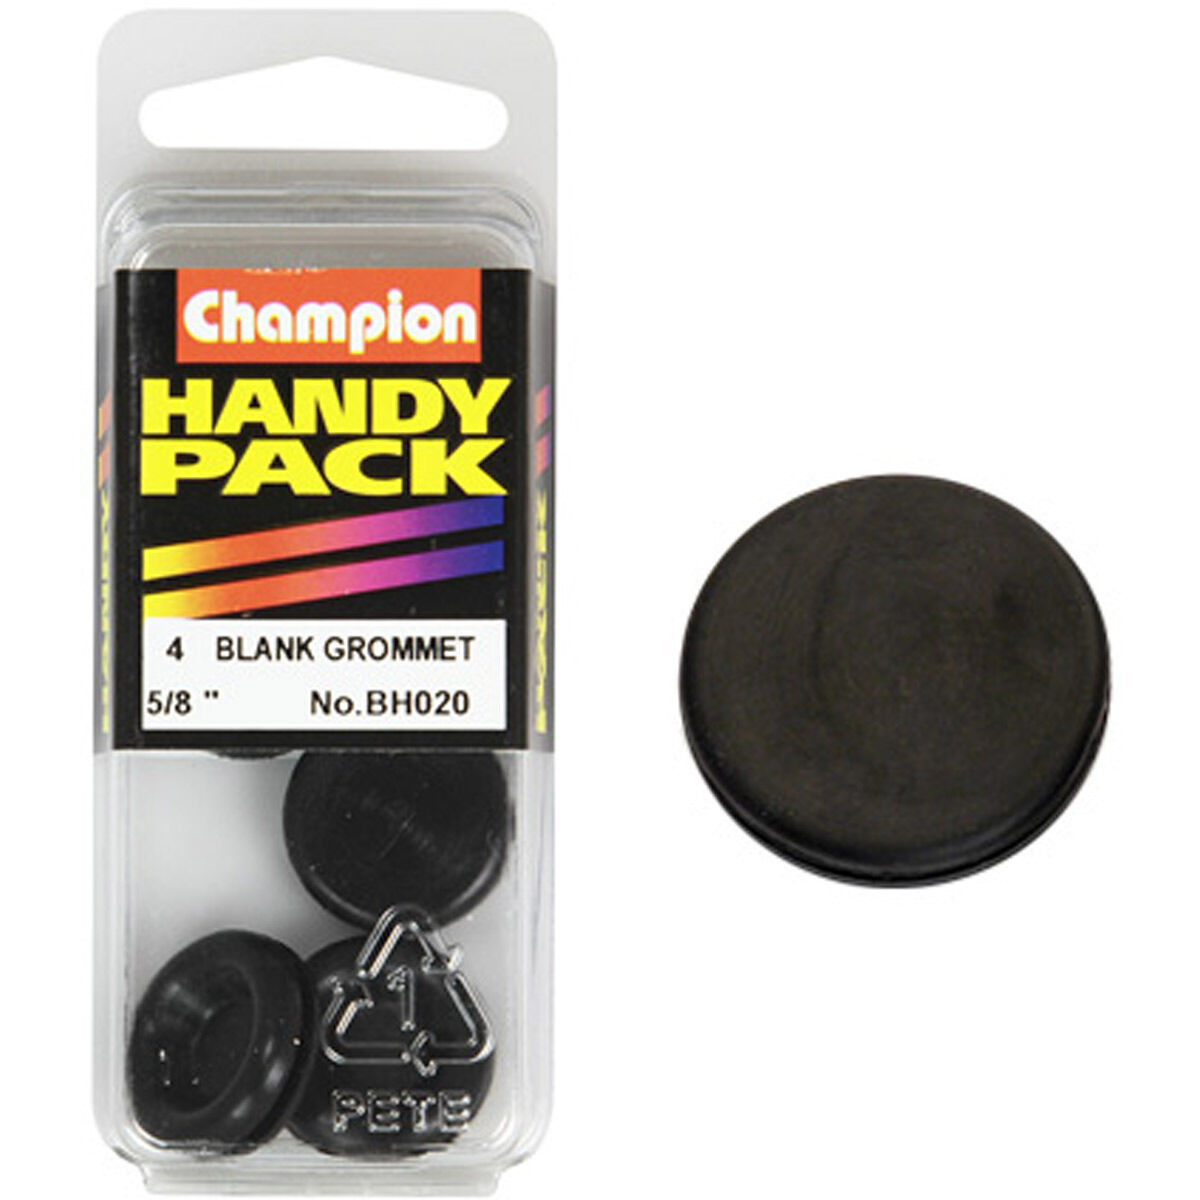 Champion Handy Pack Blanking Grommets BH020, 5/8